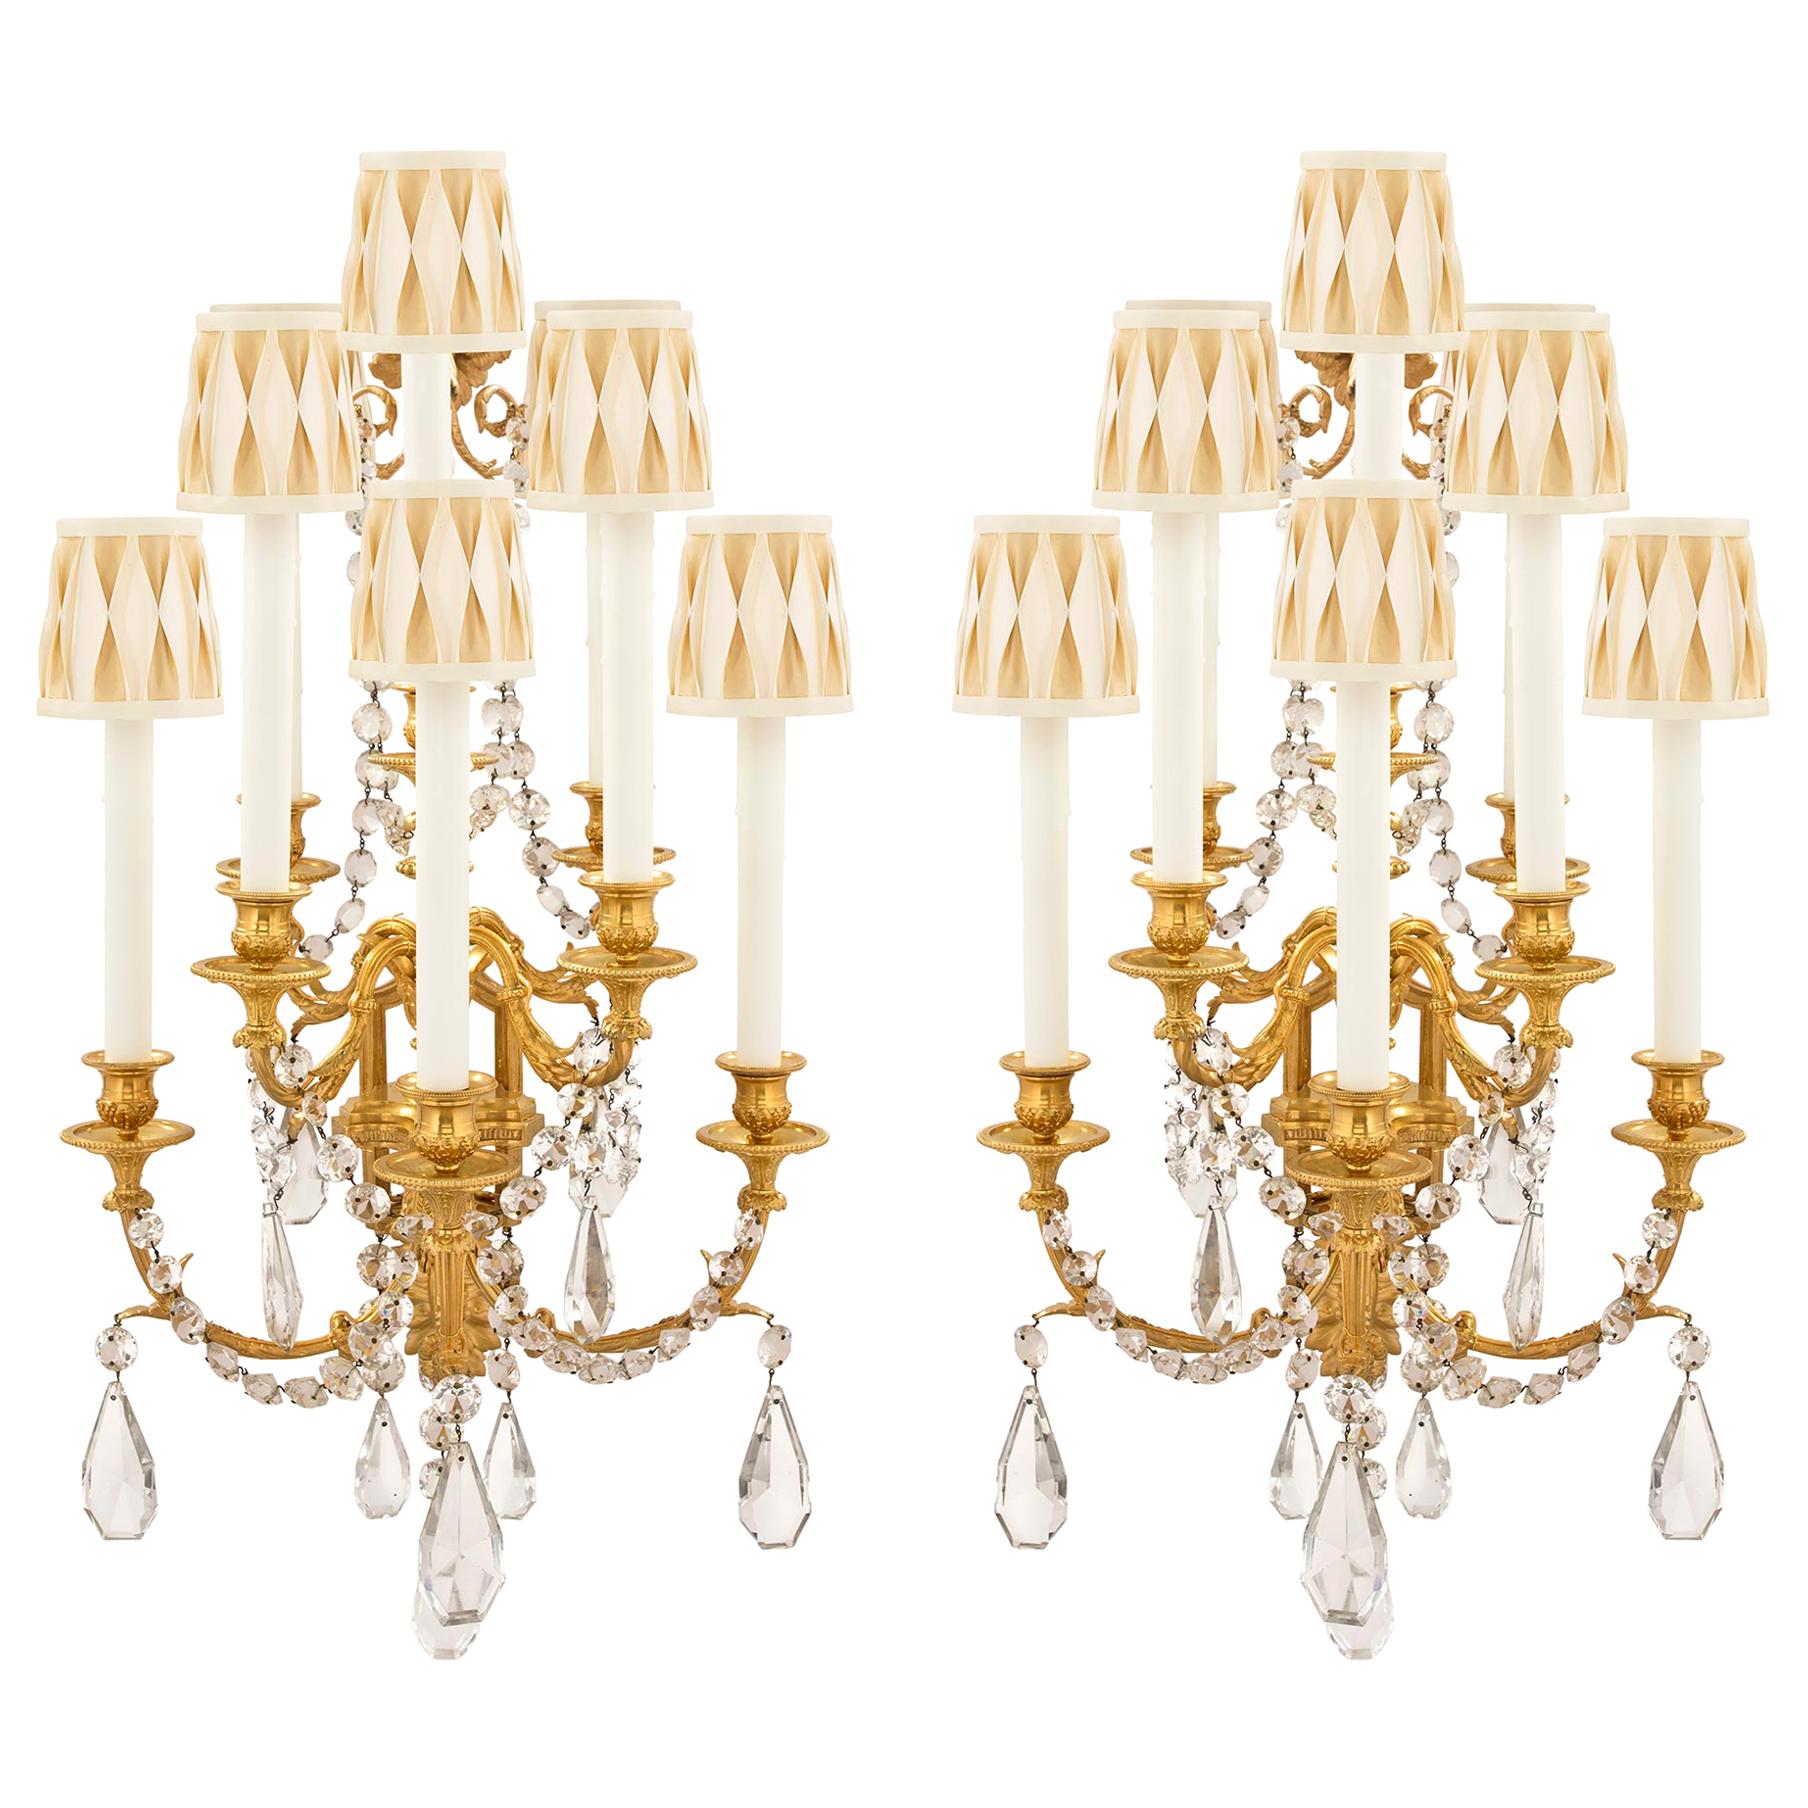 Pair of French 19th Century Louis XVI Style Ormolu and Baccarat Crystal Sconces